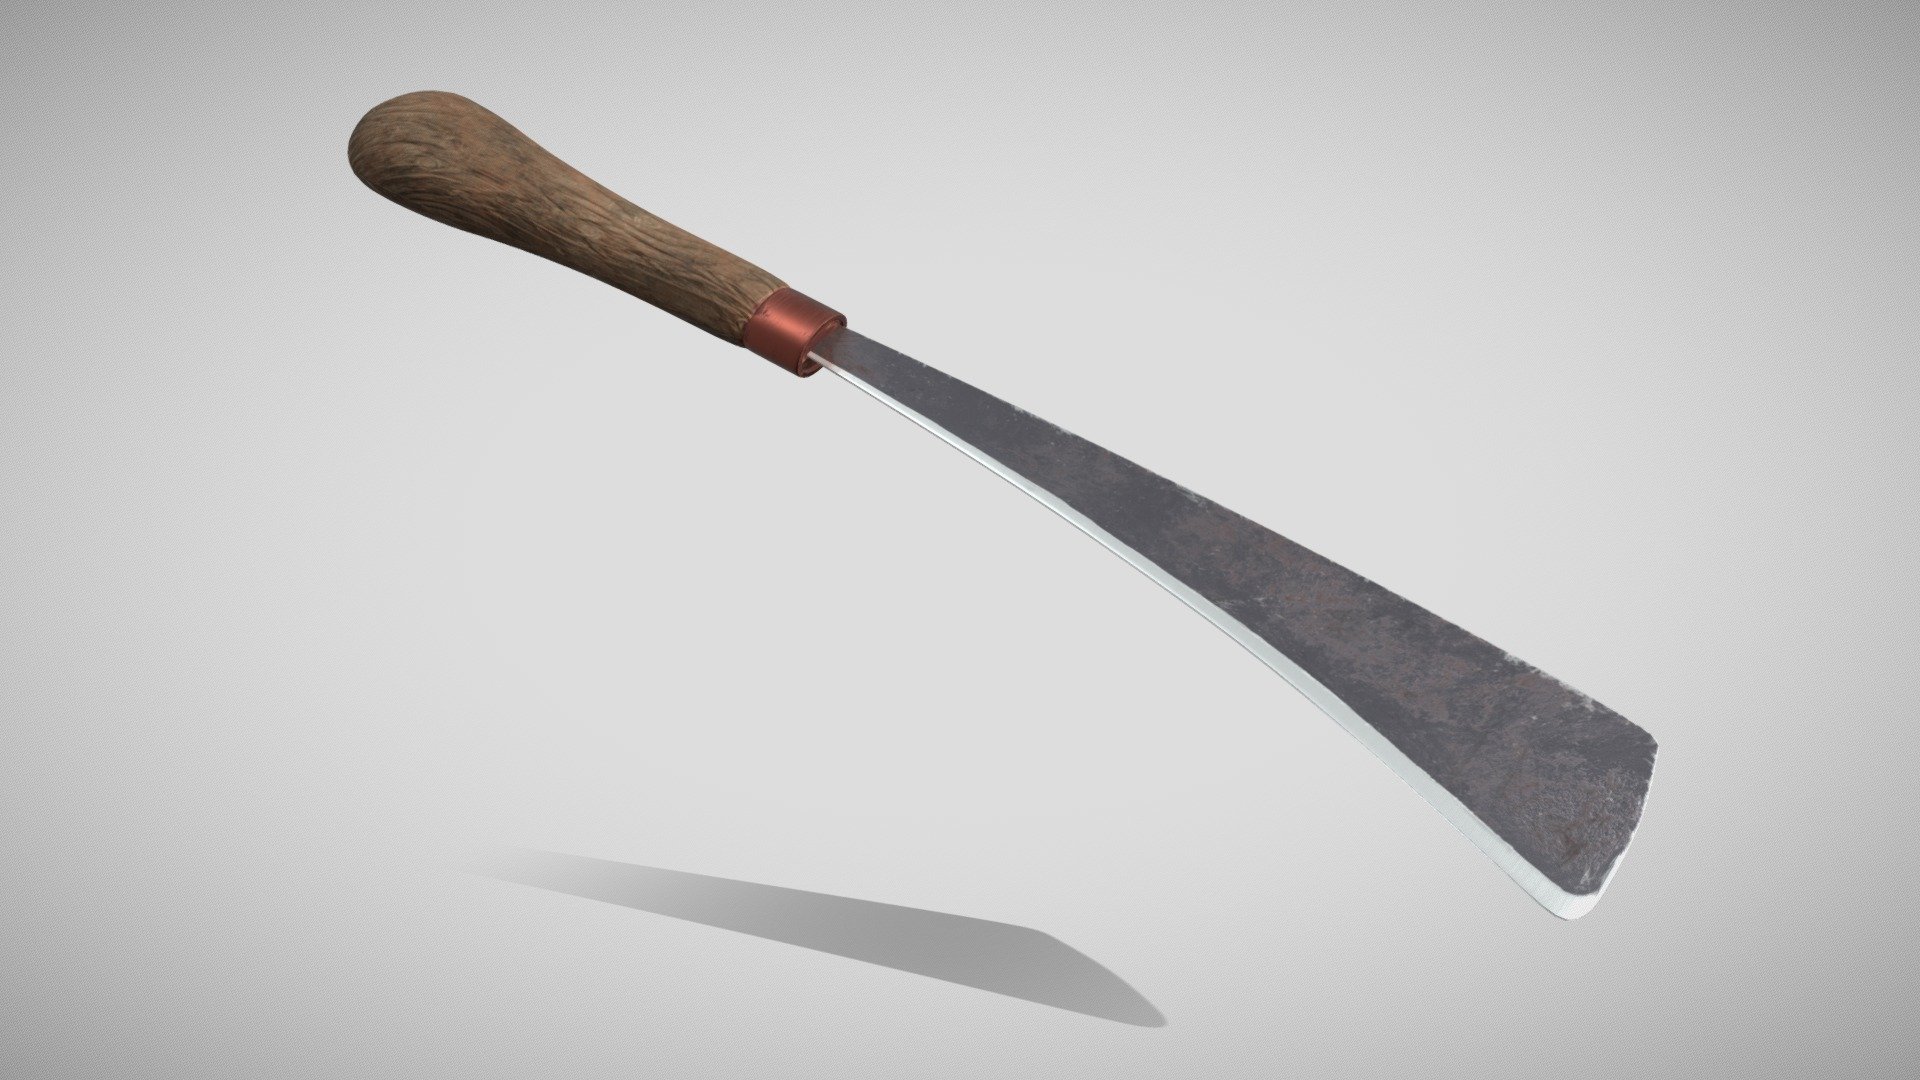 A Mizo dao from the State of Mizoram, India 3d model